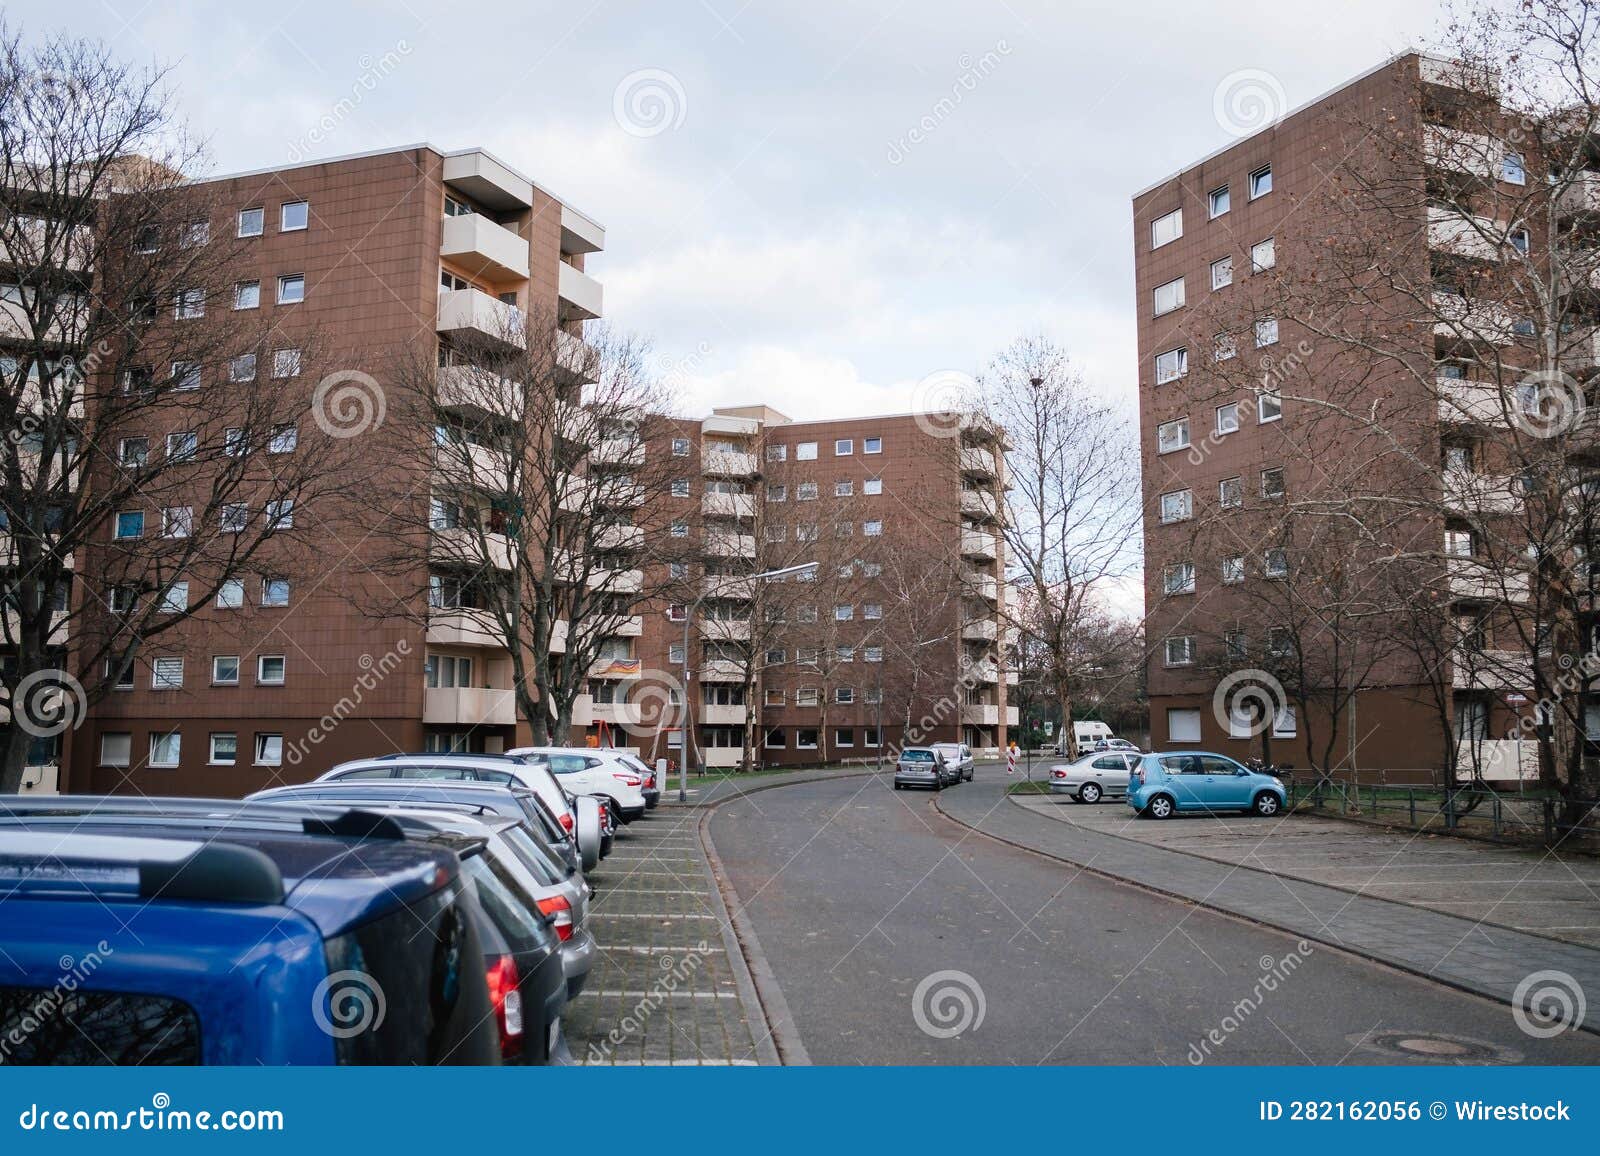 Residential Settlement with Tall Apartment Buildings in the Slums of ...